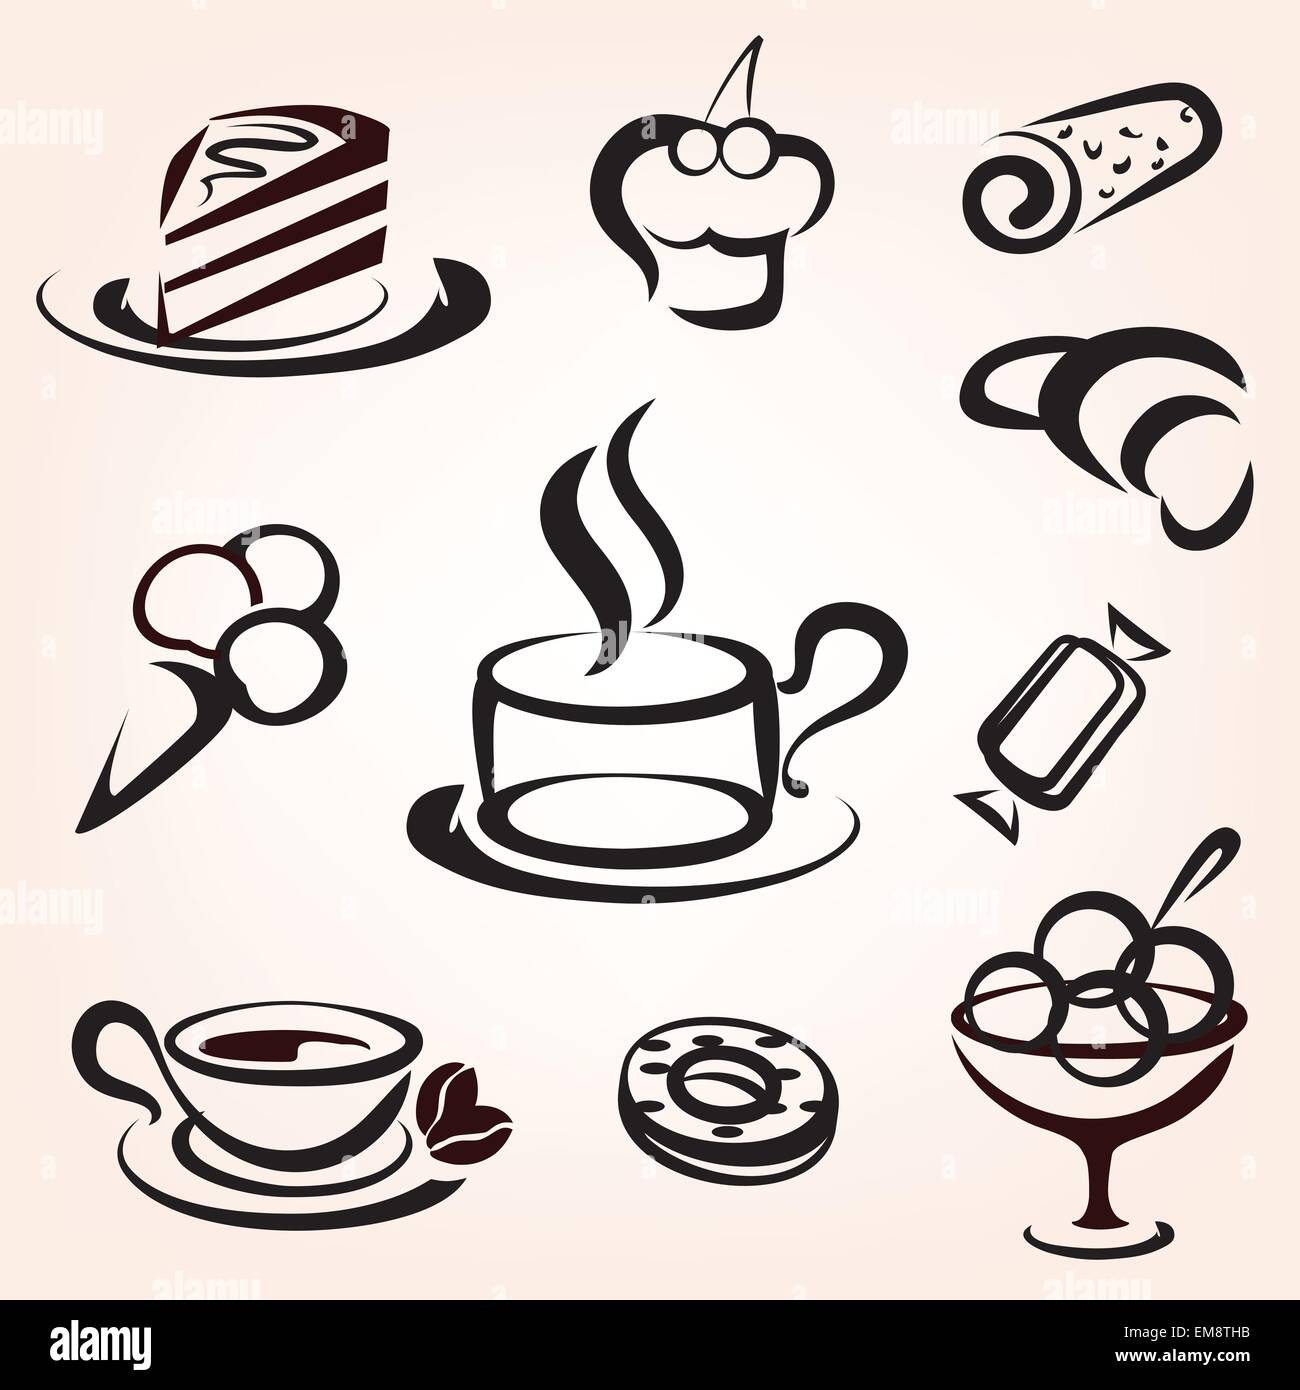 caffe, bakery and other sweet pastry icons set Stock Vector